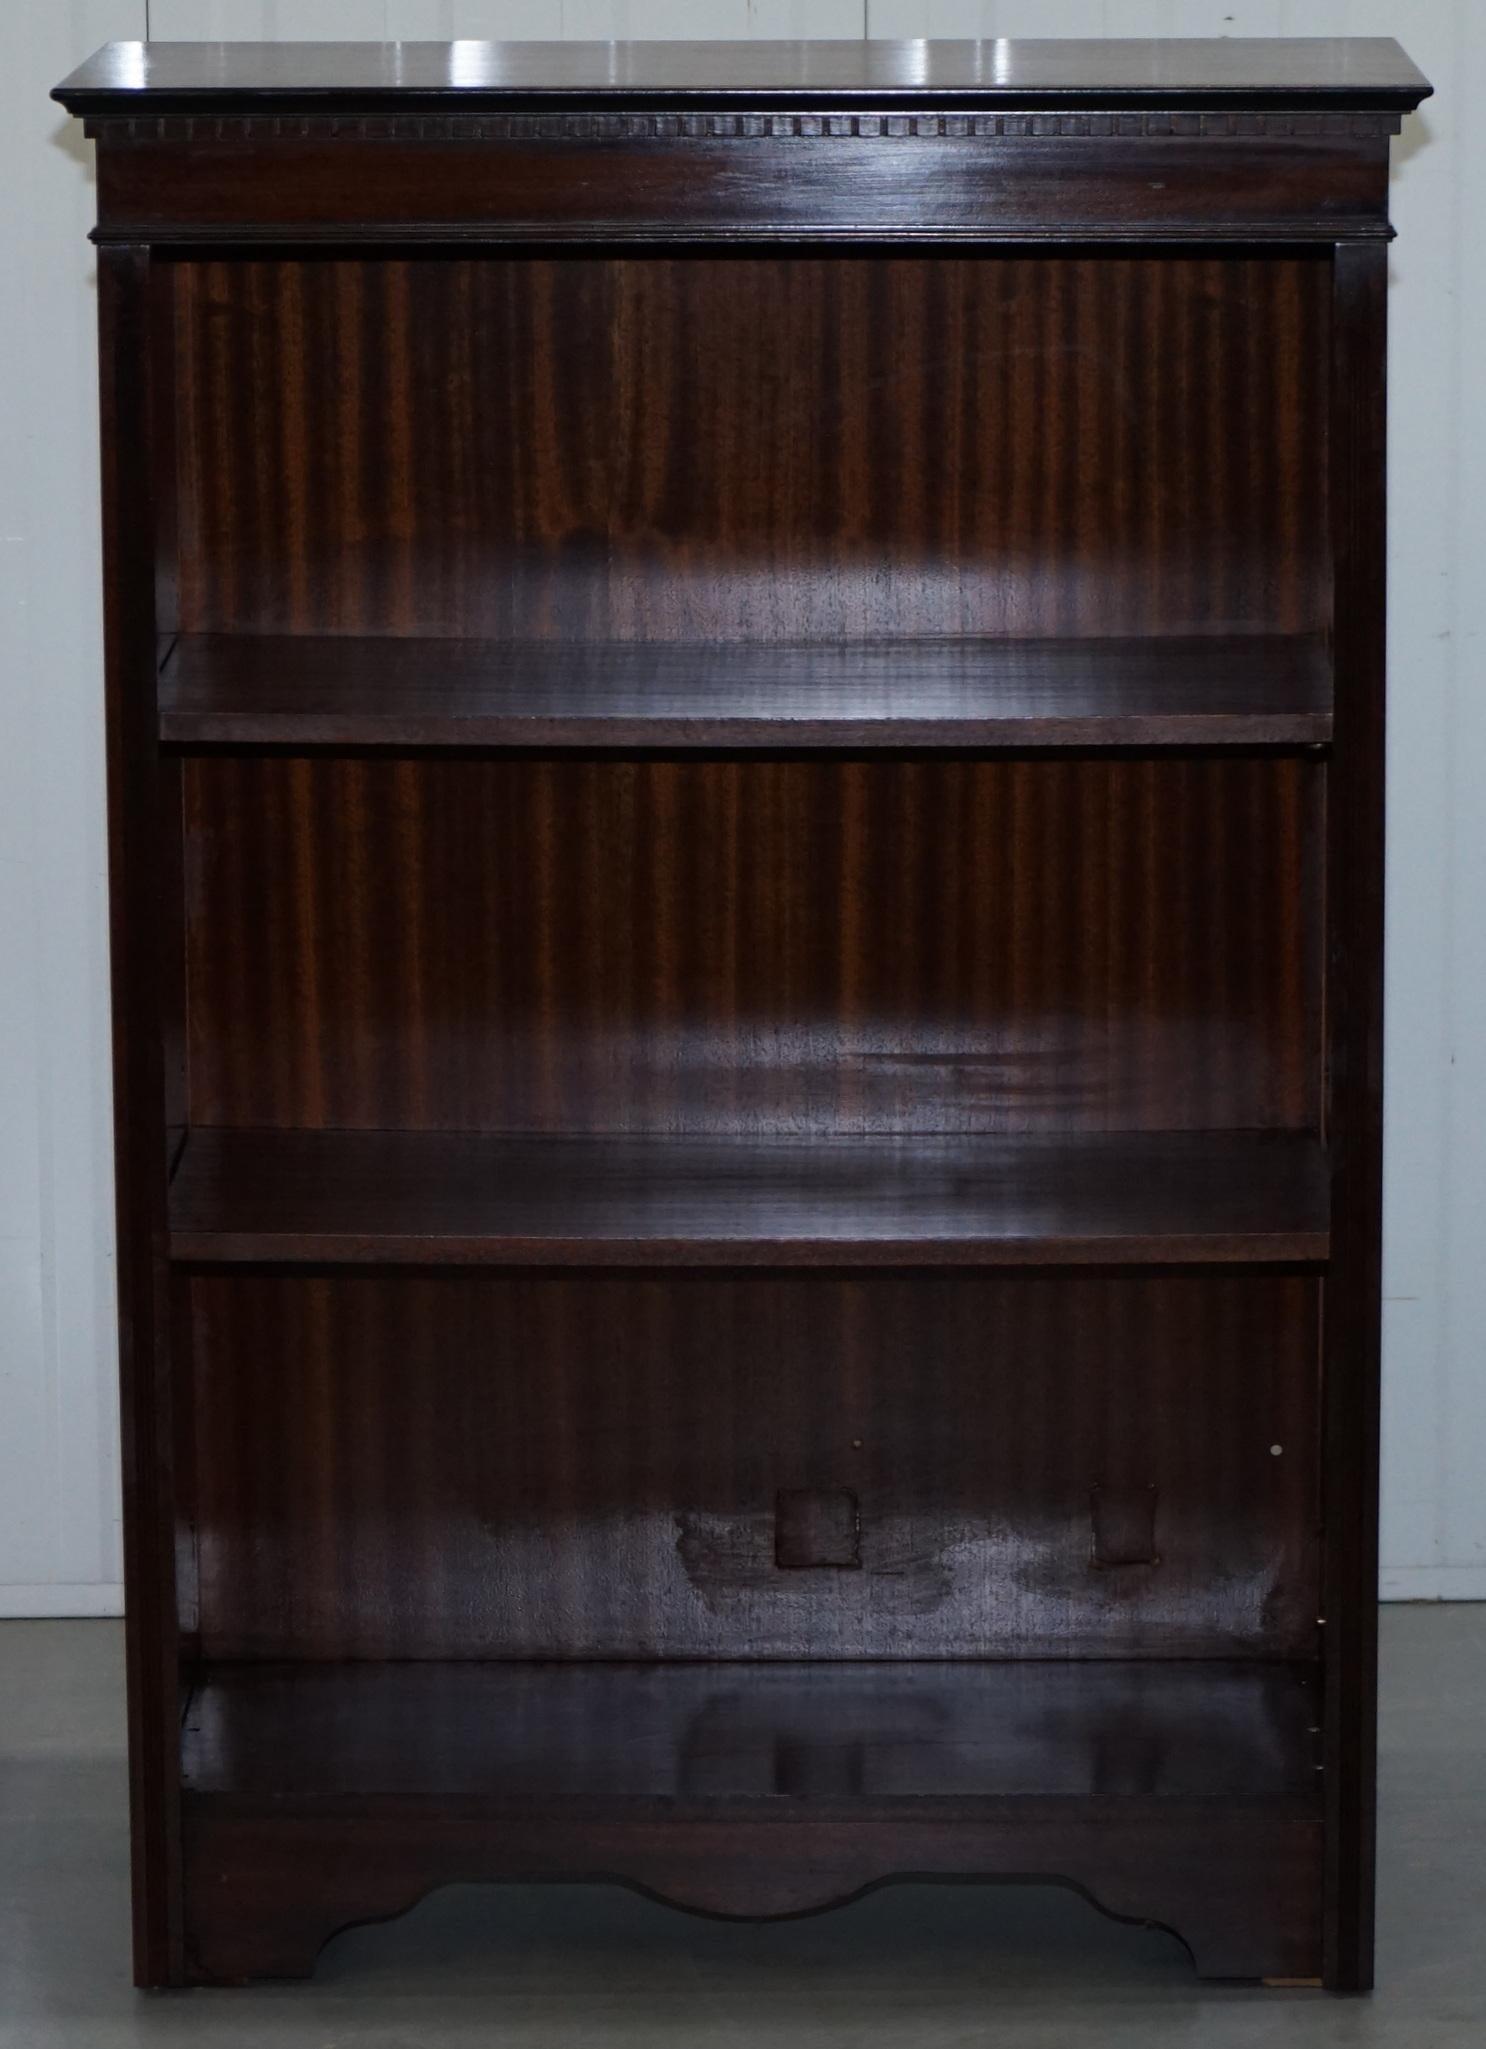 We are delighted to offer for sale this nice vintage Mahogany dwarf open bookcase with height adjustable shelves

A good practical library open bookcase, ideal for small to medium spaces and with a nice top section for displaying trinkets

The